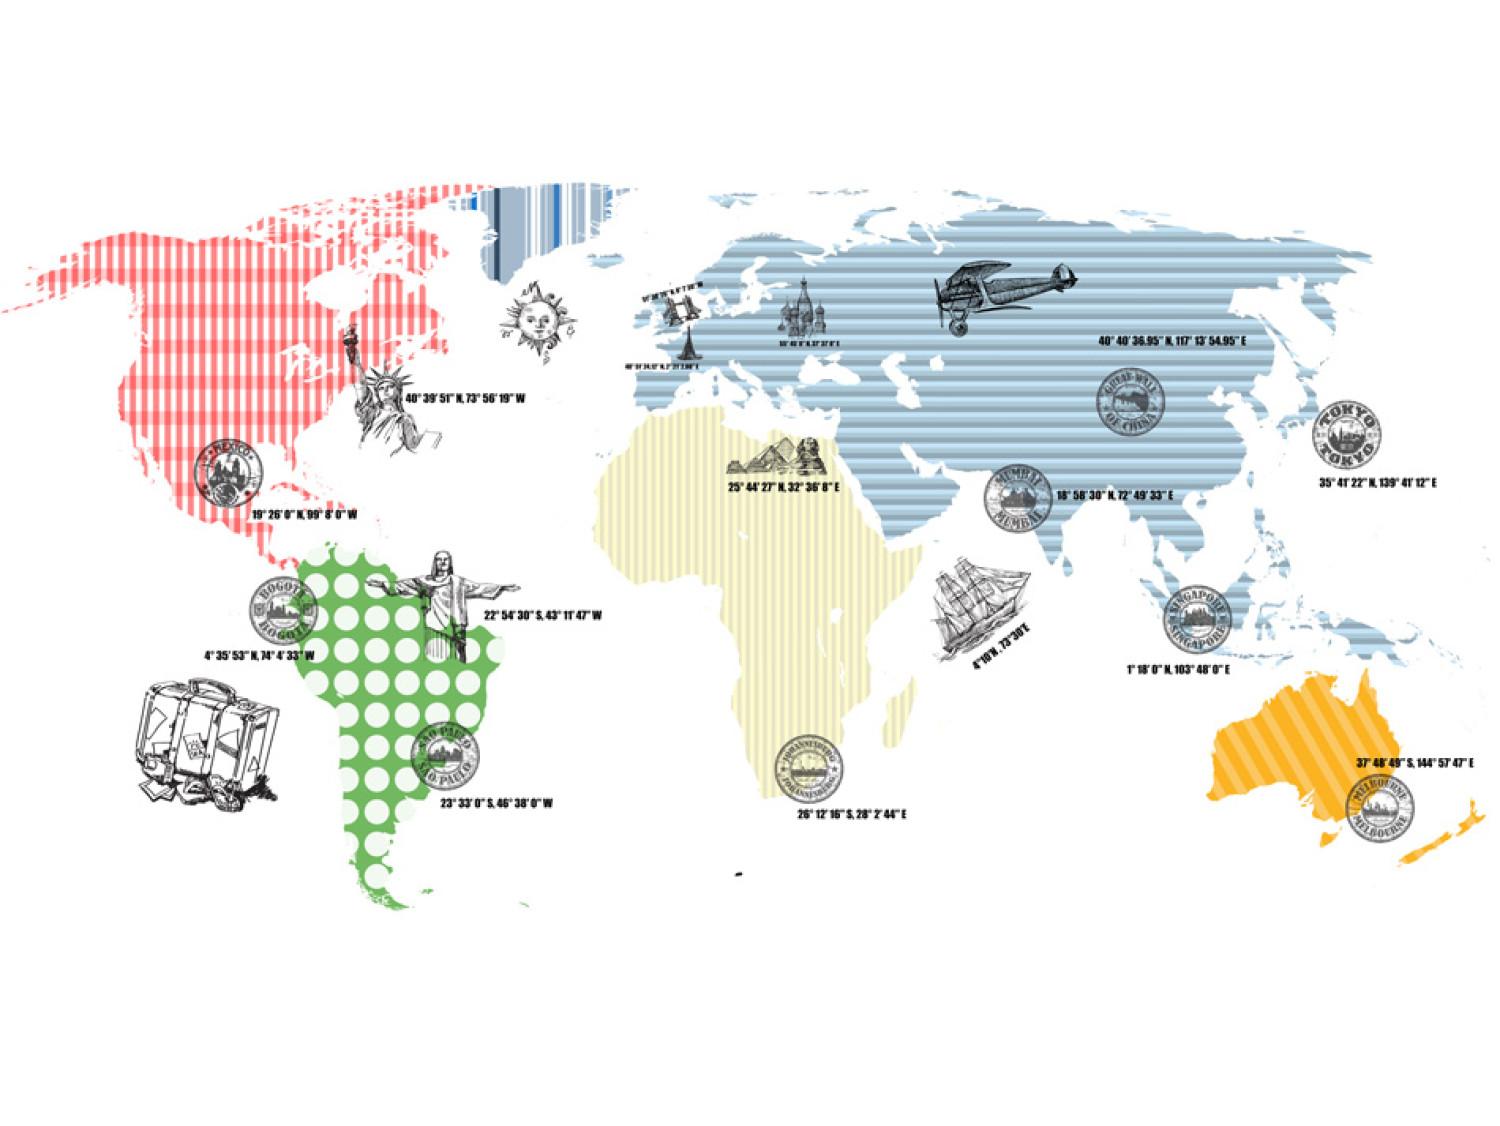 Wall Mural World map - outline of continents with coloured patterns on a white background